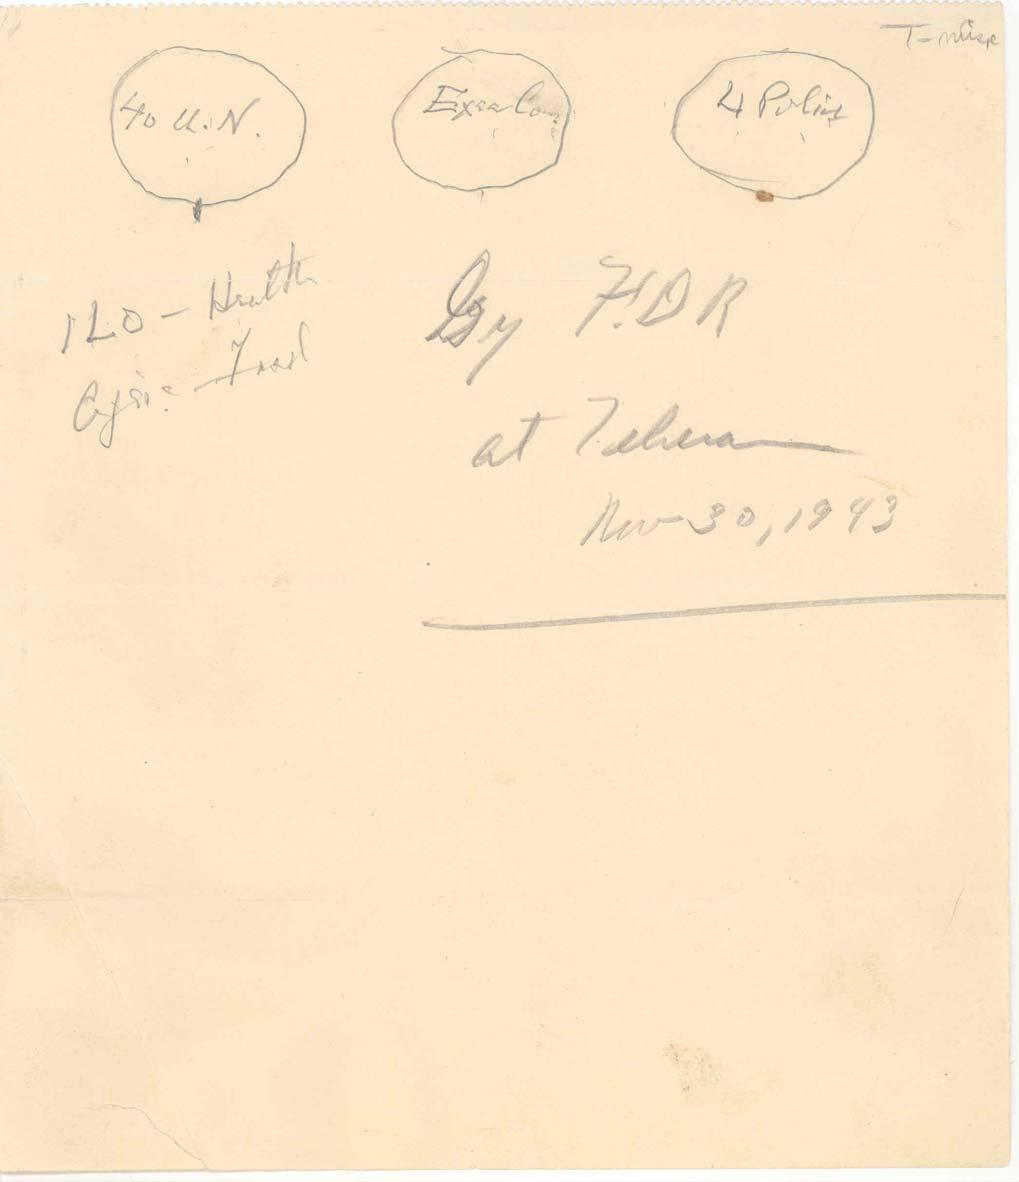 United Nations Organization sketch by FDR. By late 1943, FDR was formulating ideas for the postwar peace. Critical to his thinking was a new United Nations Organization.